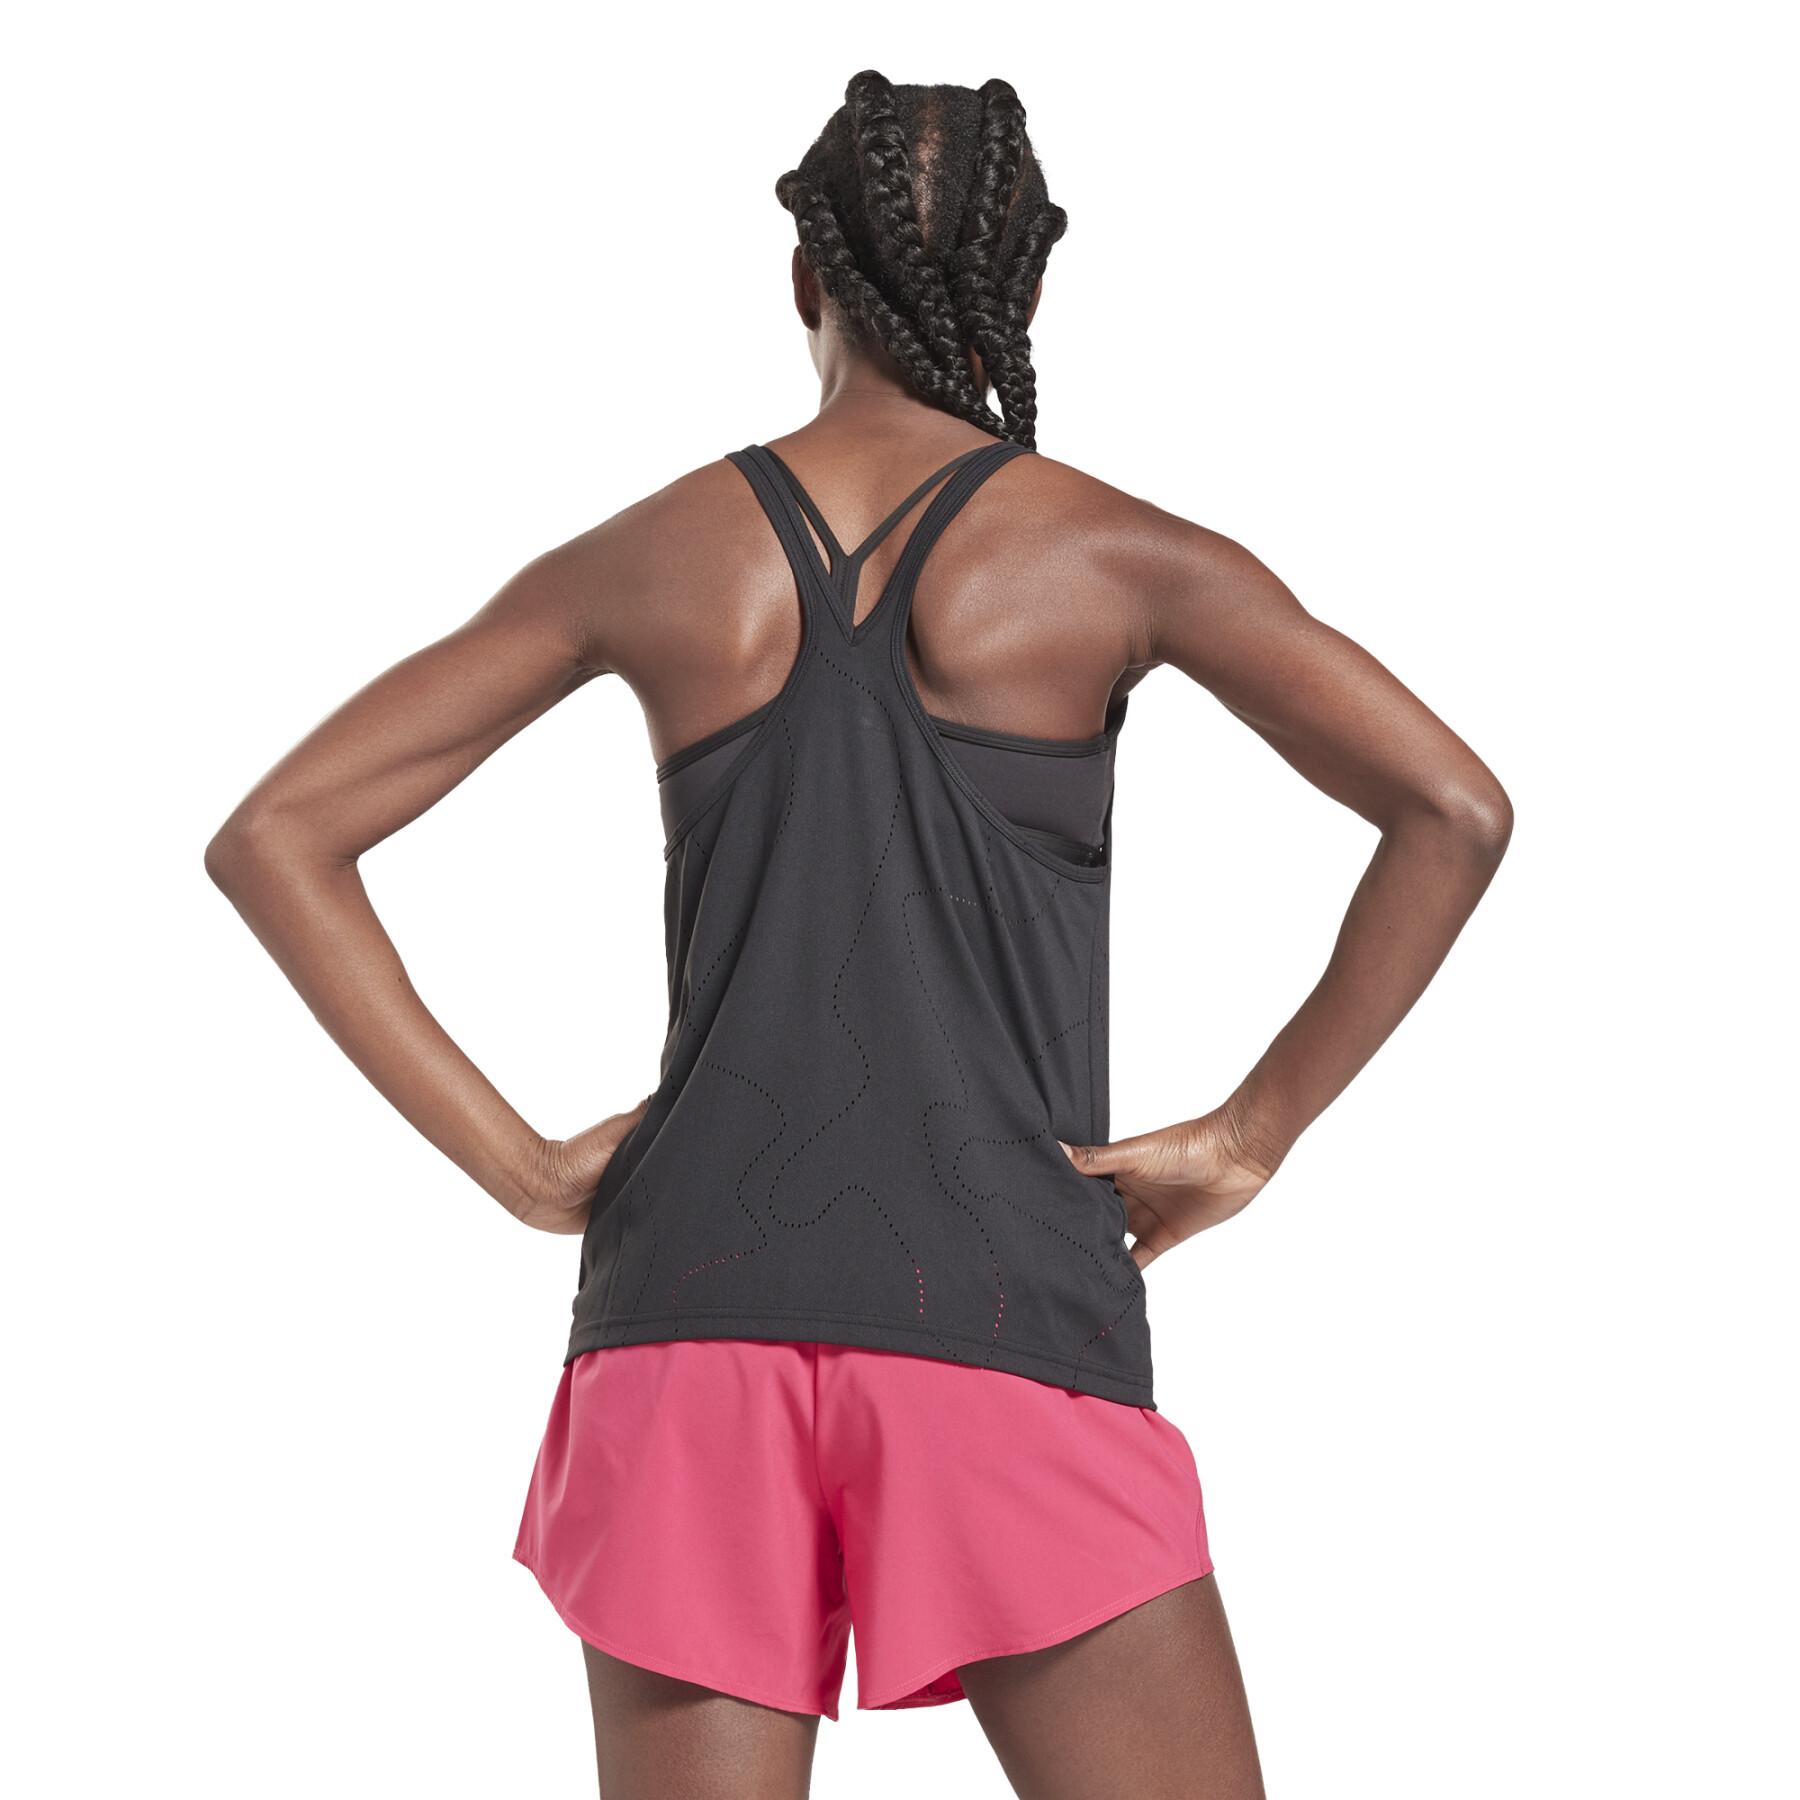 Women's perforated tank top Reebok United By Fitness